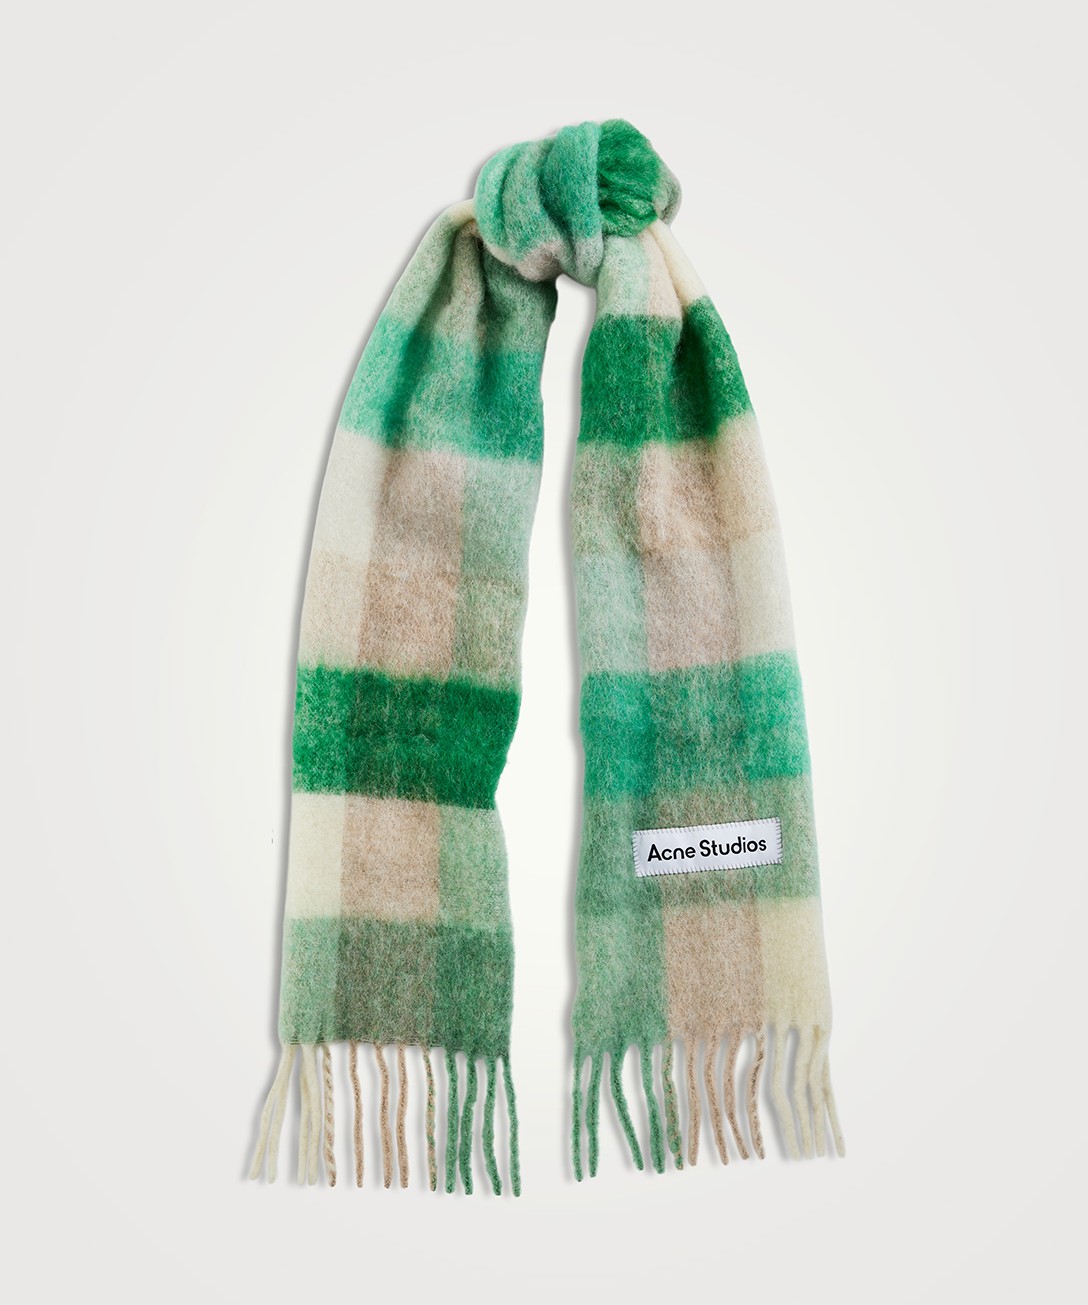 Image of a checkered print Acne studios scarf. There is fringe detailing and a label reading "Acne Studios." The scarf is in various shades of grey, cream and green.